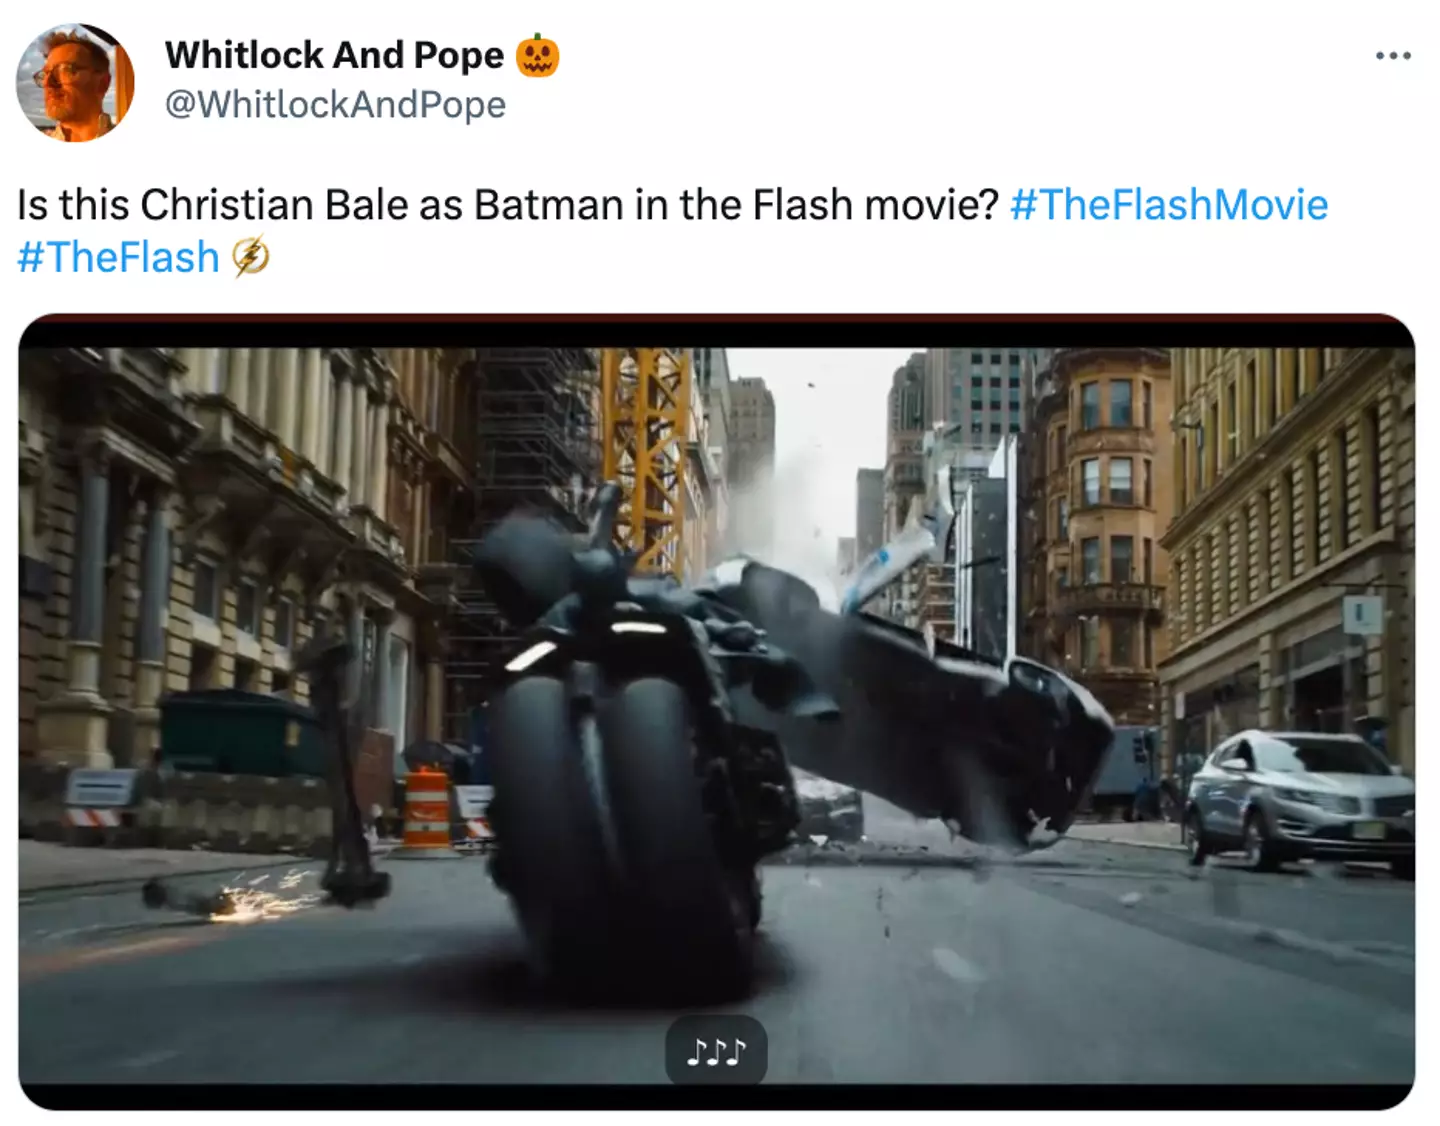 “So did anybody else see Christian Bale's Batman in The Flash trailer?"